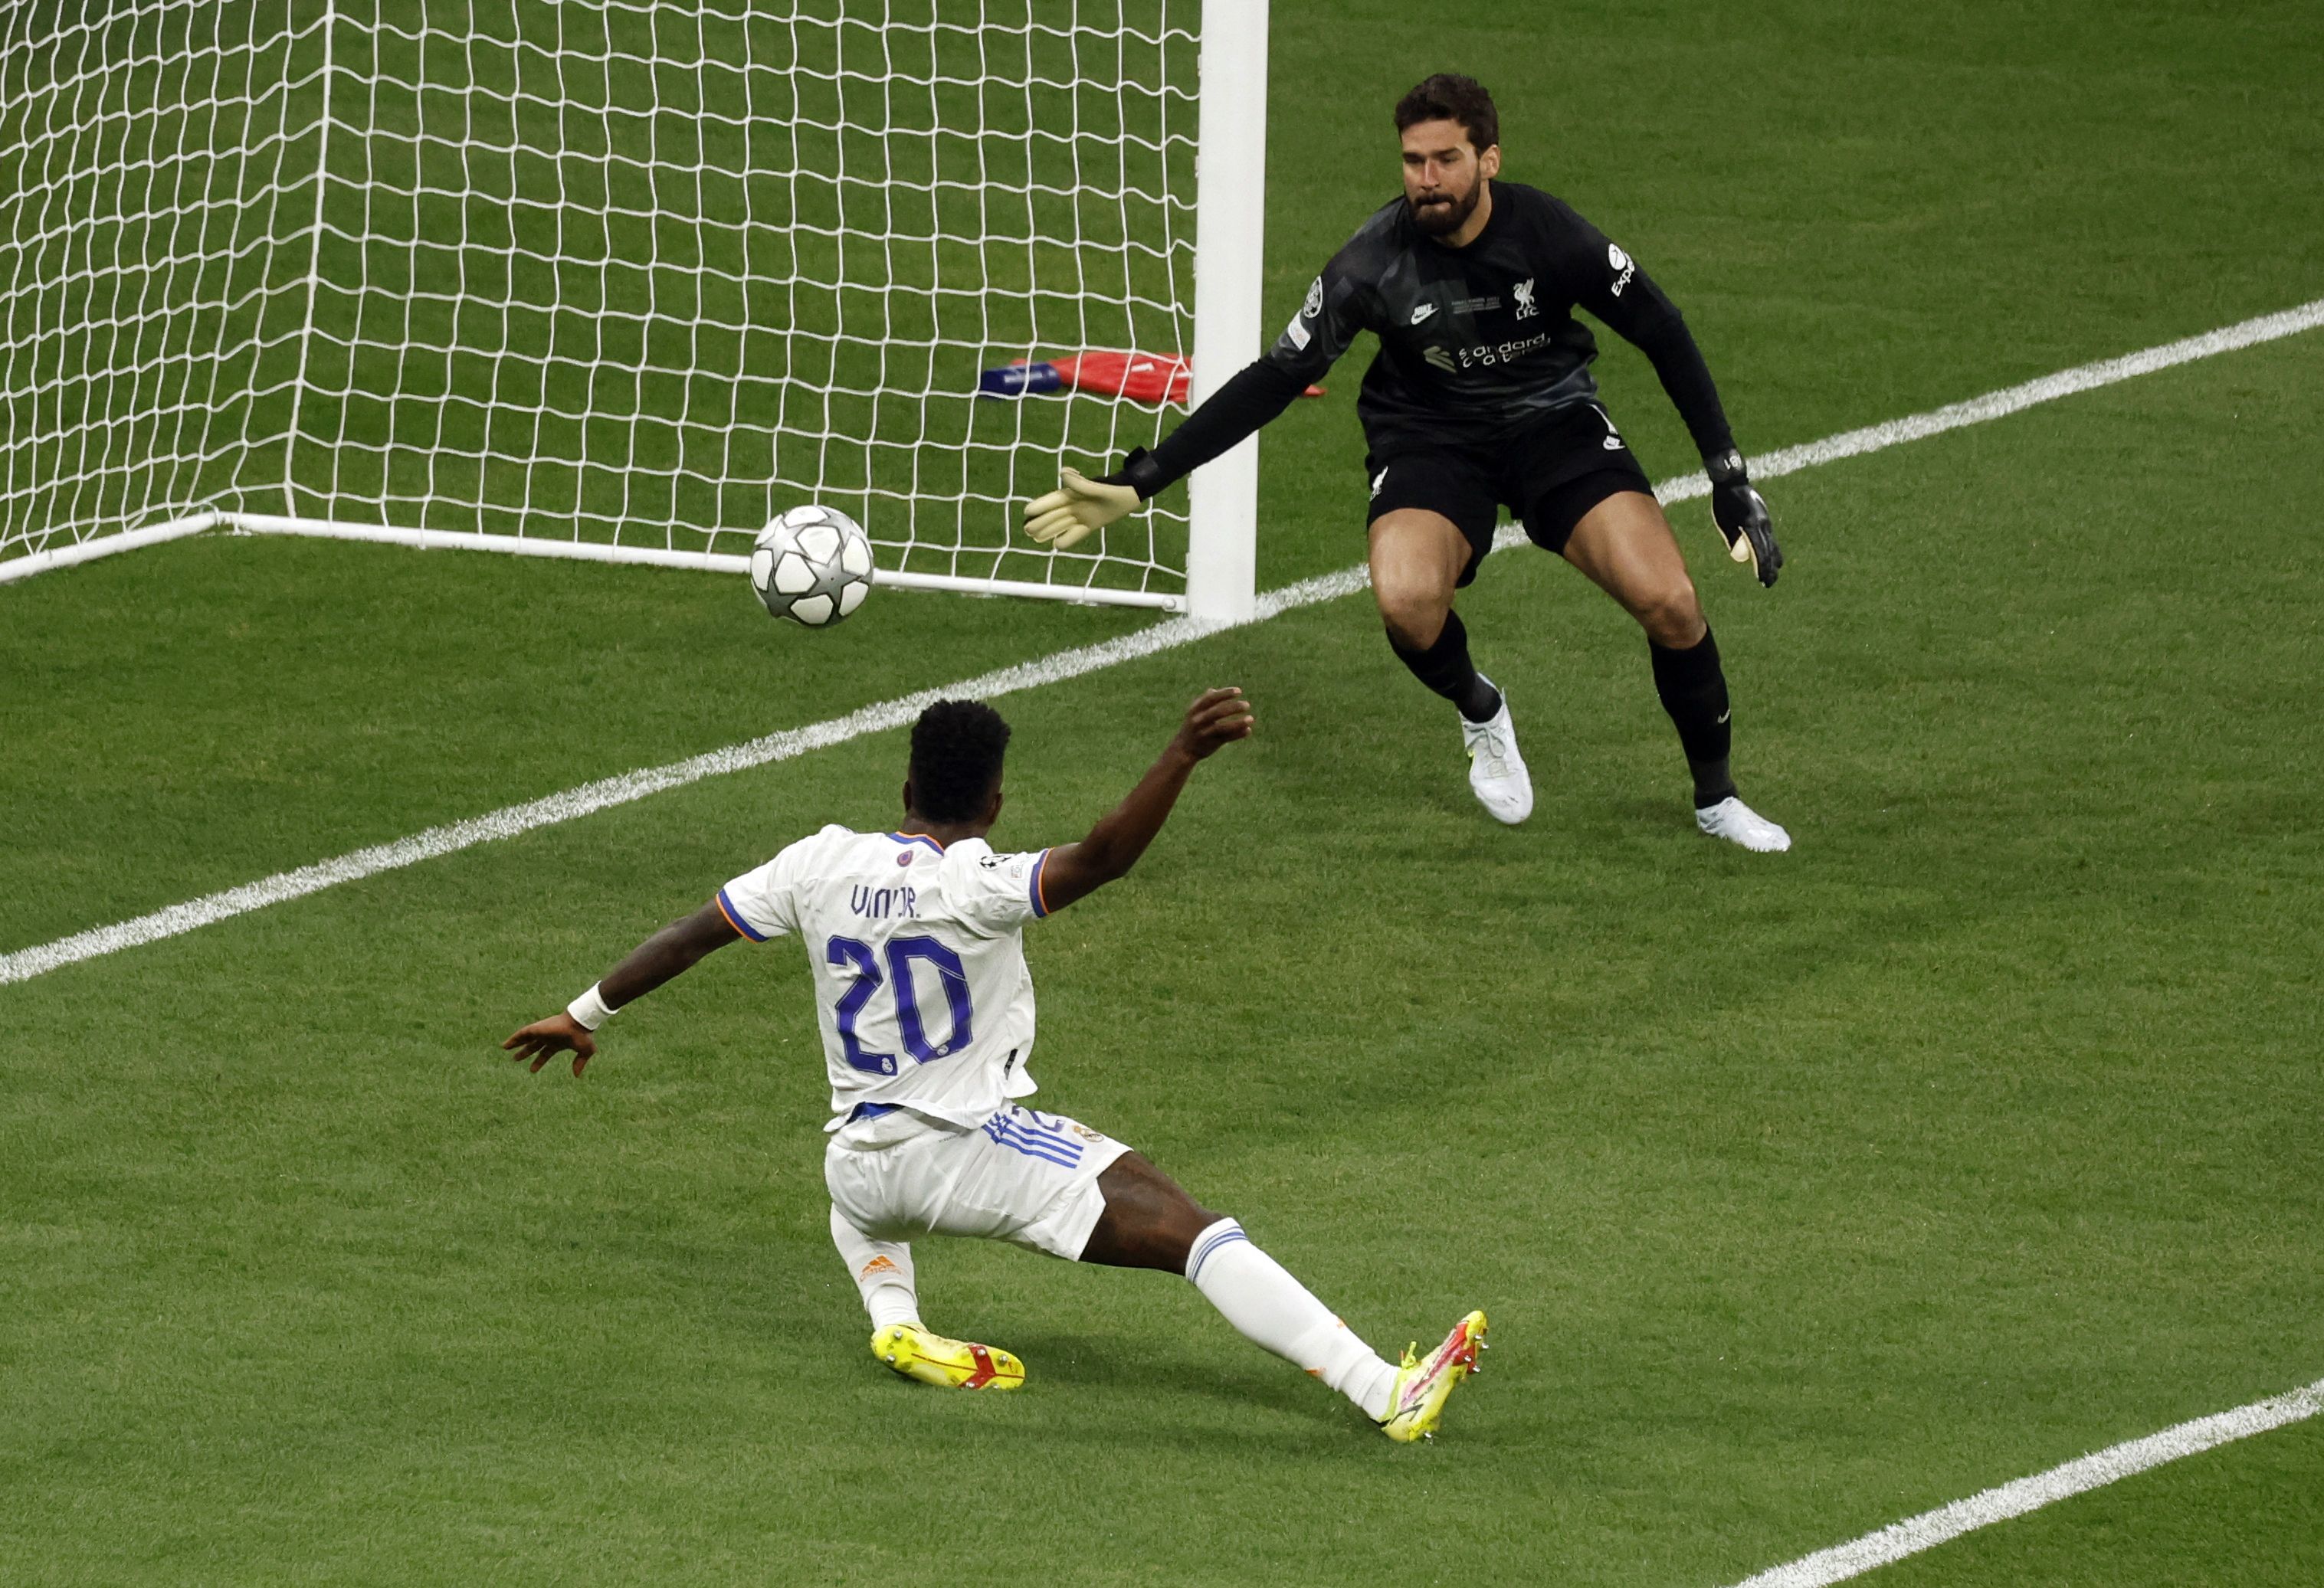 Soccer Football - Champions League Final - Liverpool v Real Madrid - Stade de France, Saint-Denis near Paris, France - May 28, 2022  Real Madrid's Vinicius Junior scores their first goal REUTERS/Gonzalo Fuentes